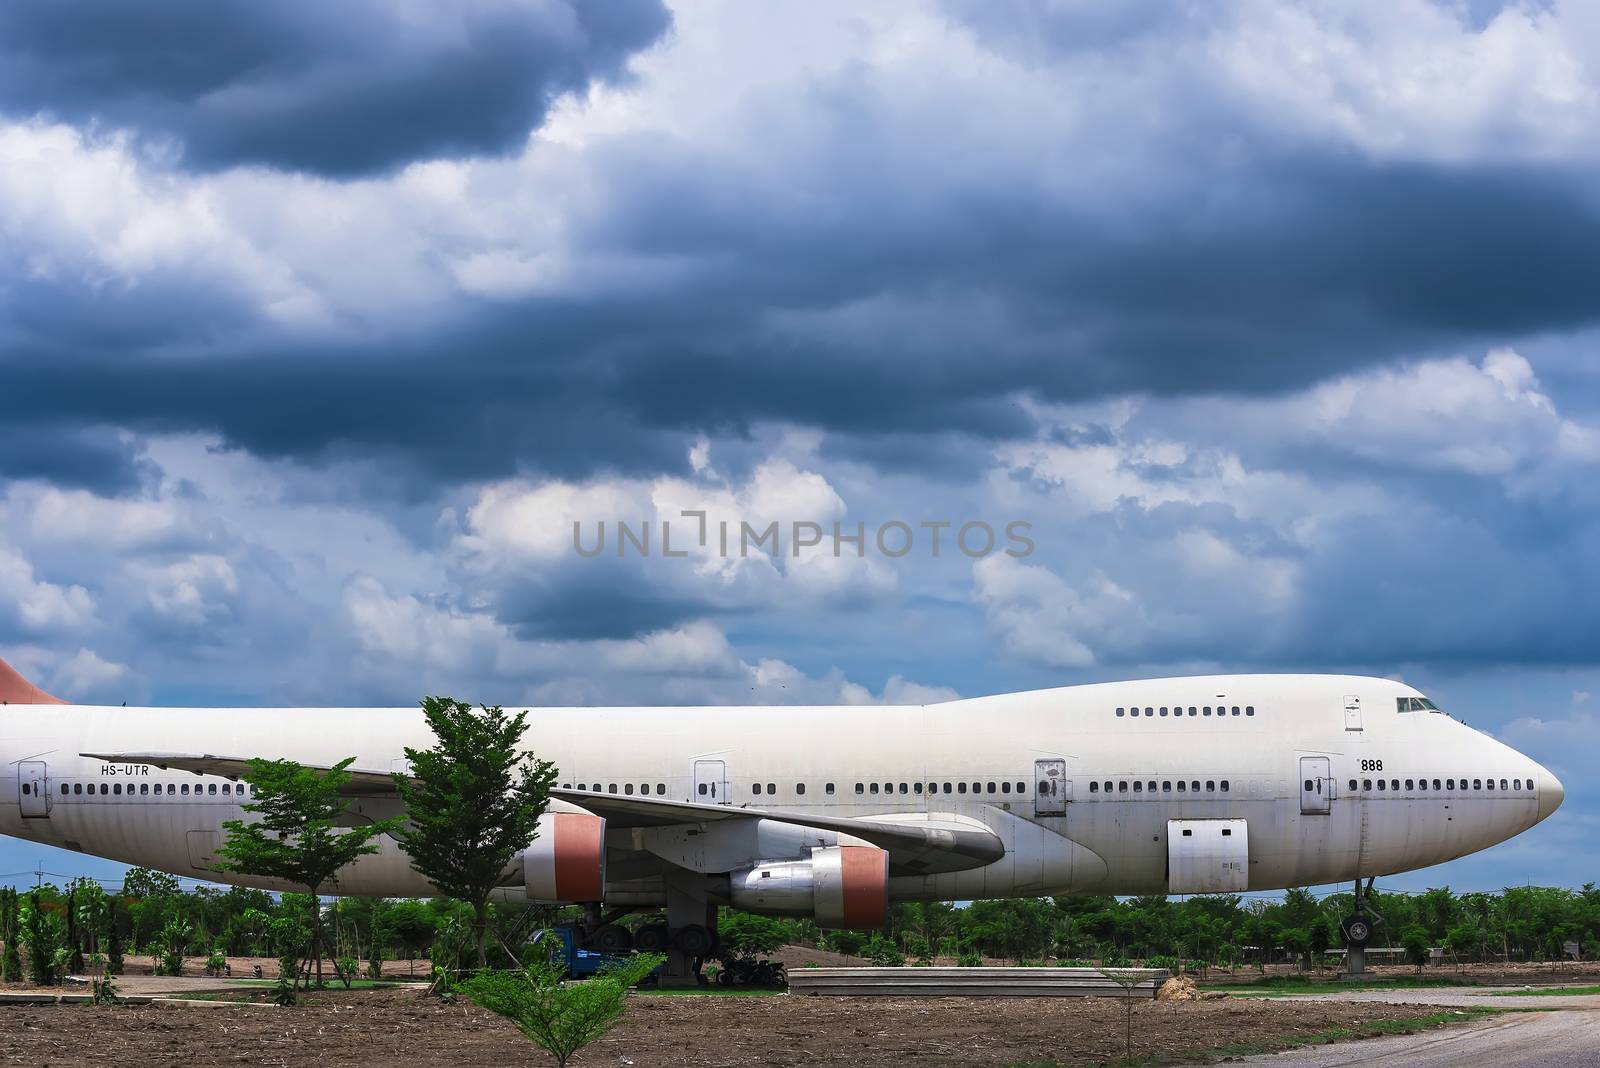 Nakhon Pathom, Thailand - June, 09, 2020 : The old commercial aircraft was discharged with a stormy sky at Nakhon Pathom, Thailand